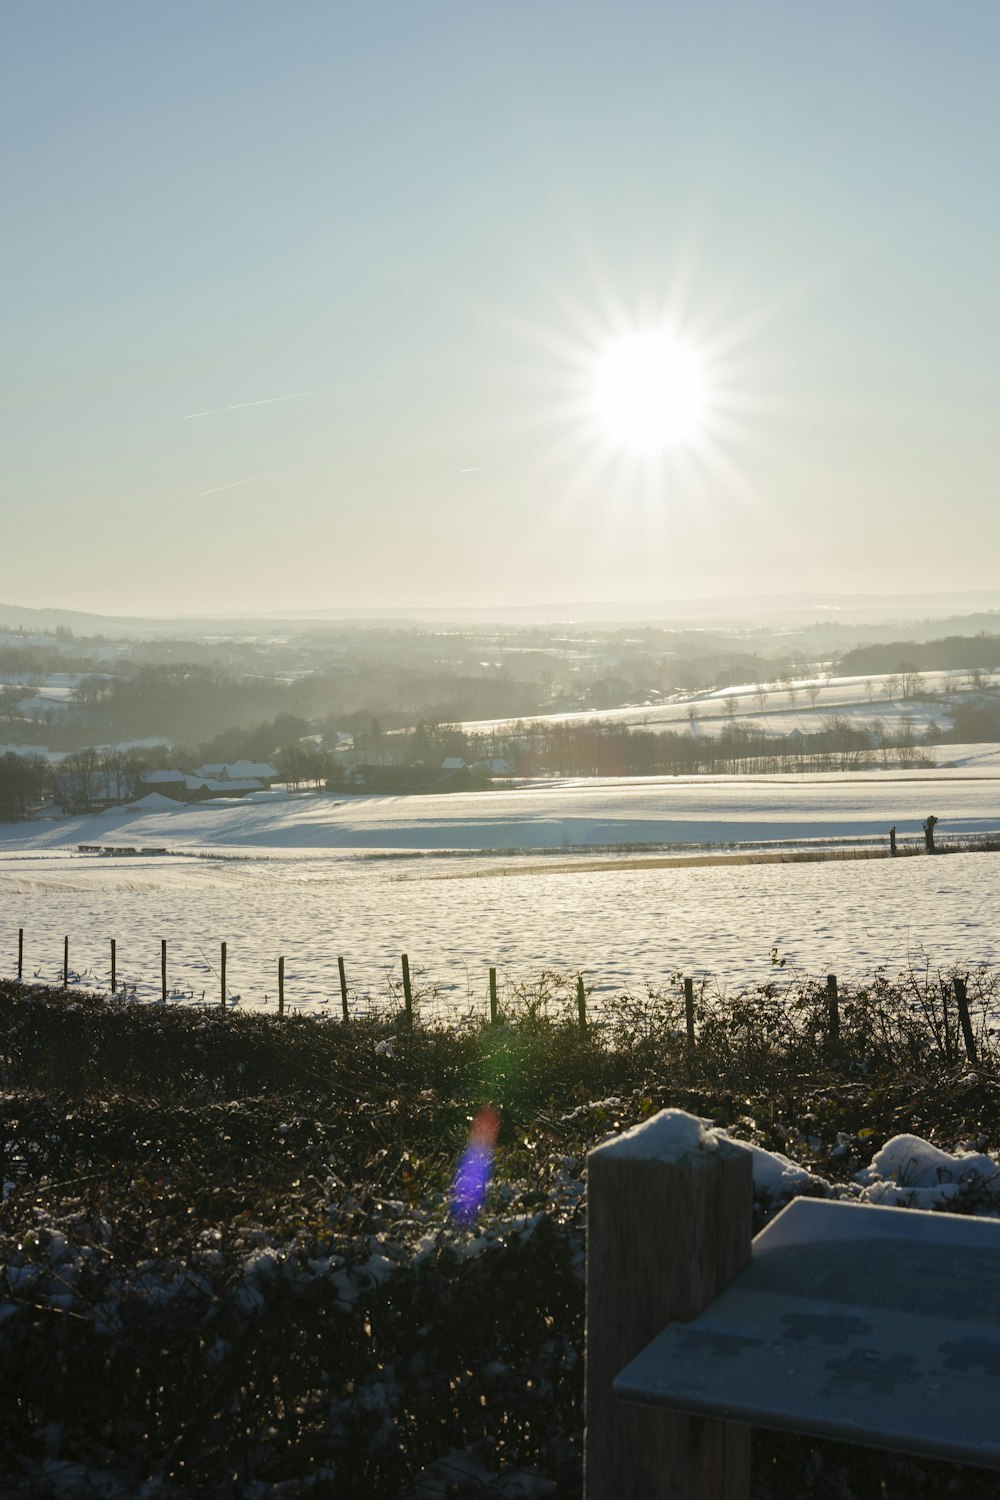 the sun is shining over a snowy field